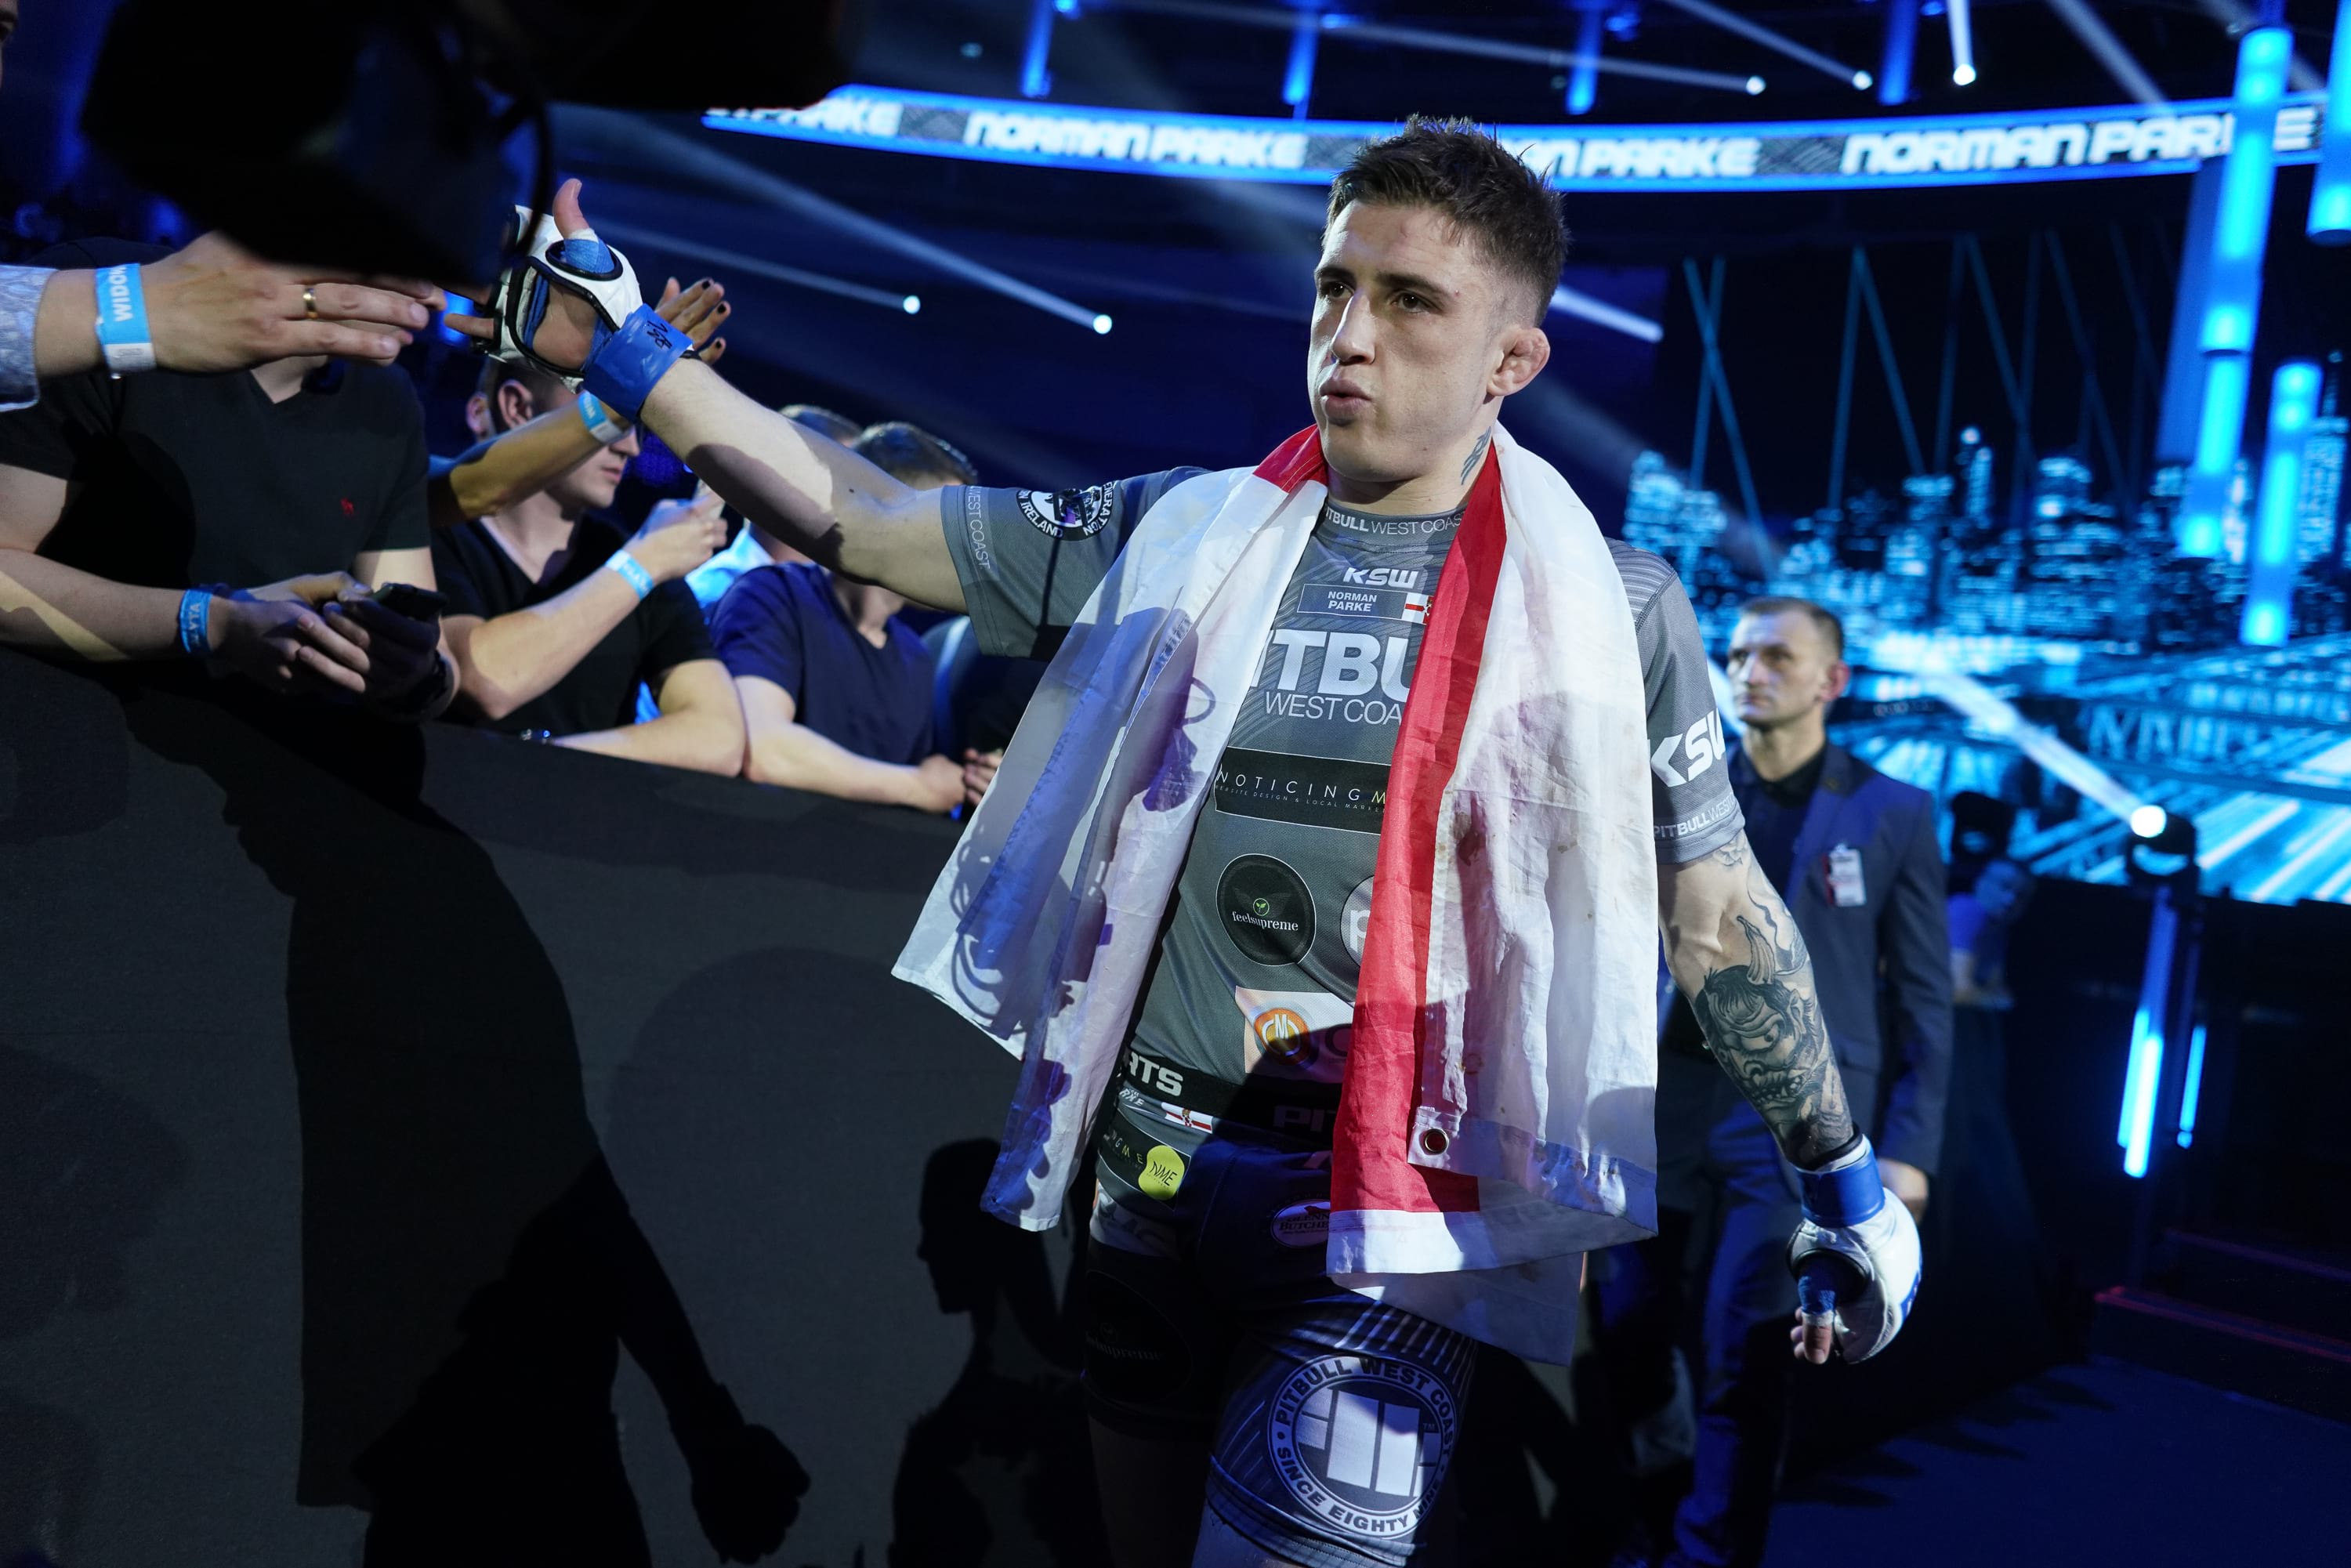 Norman Parke will fight for the interim KSW lightweight championship at KSW 50 in London